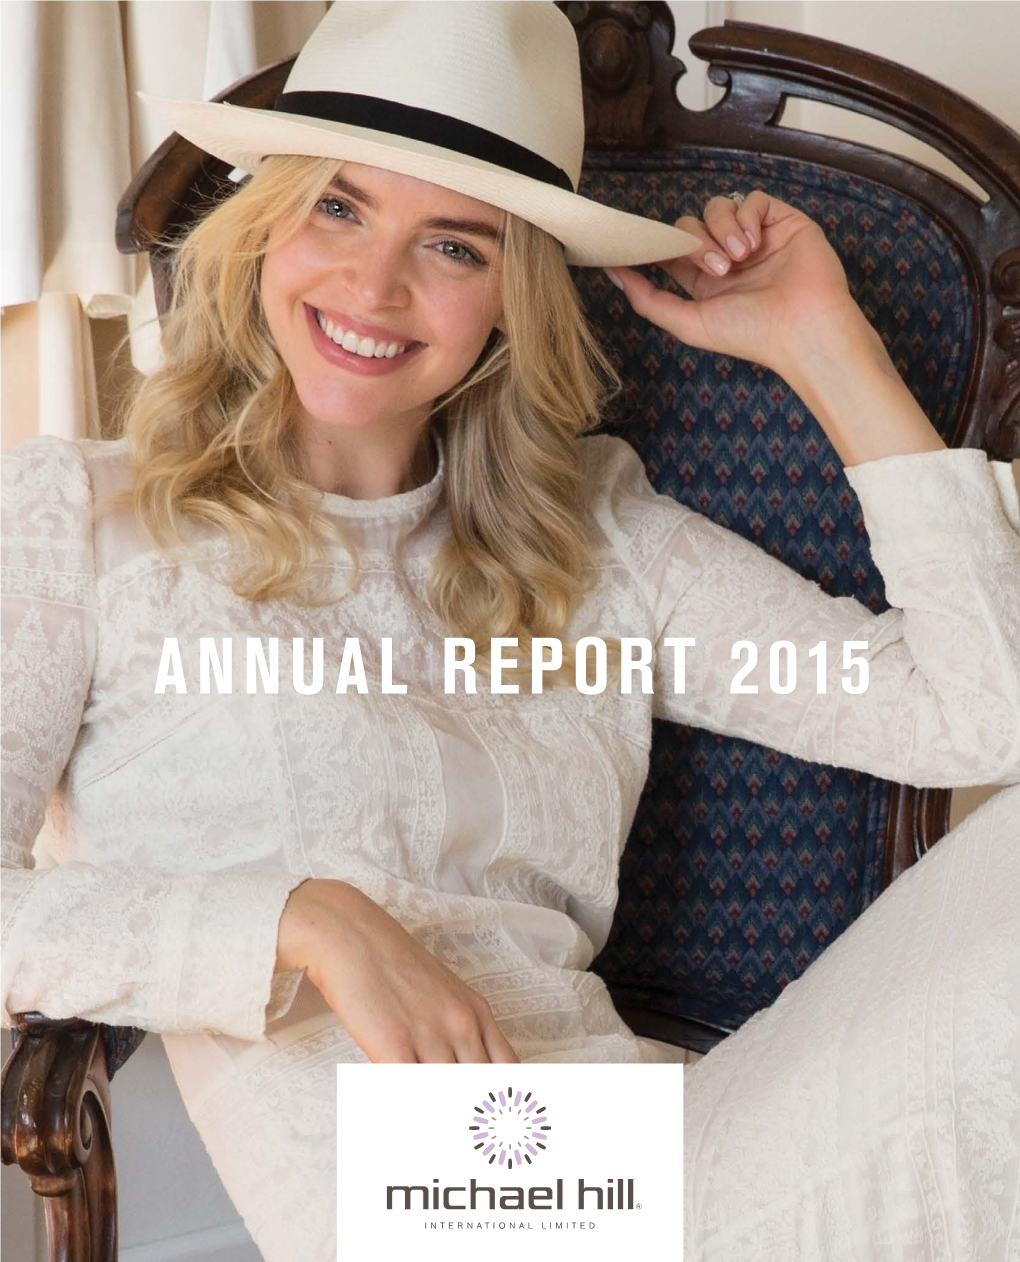 Michael Hill International Limited Annual Report 2015